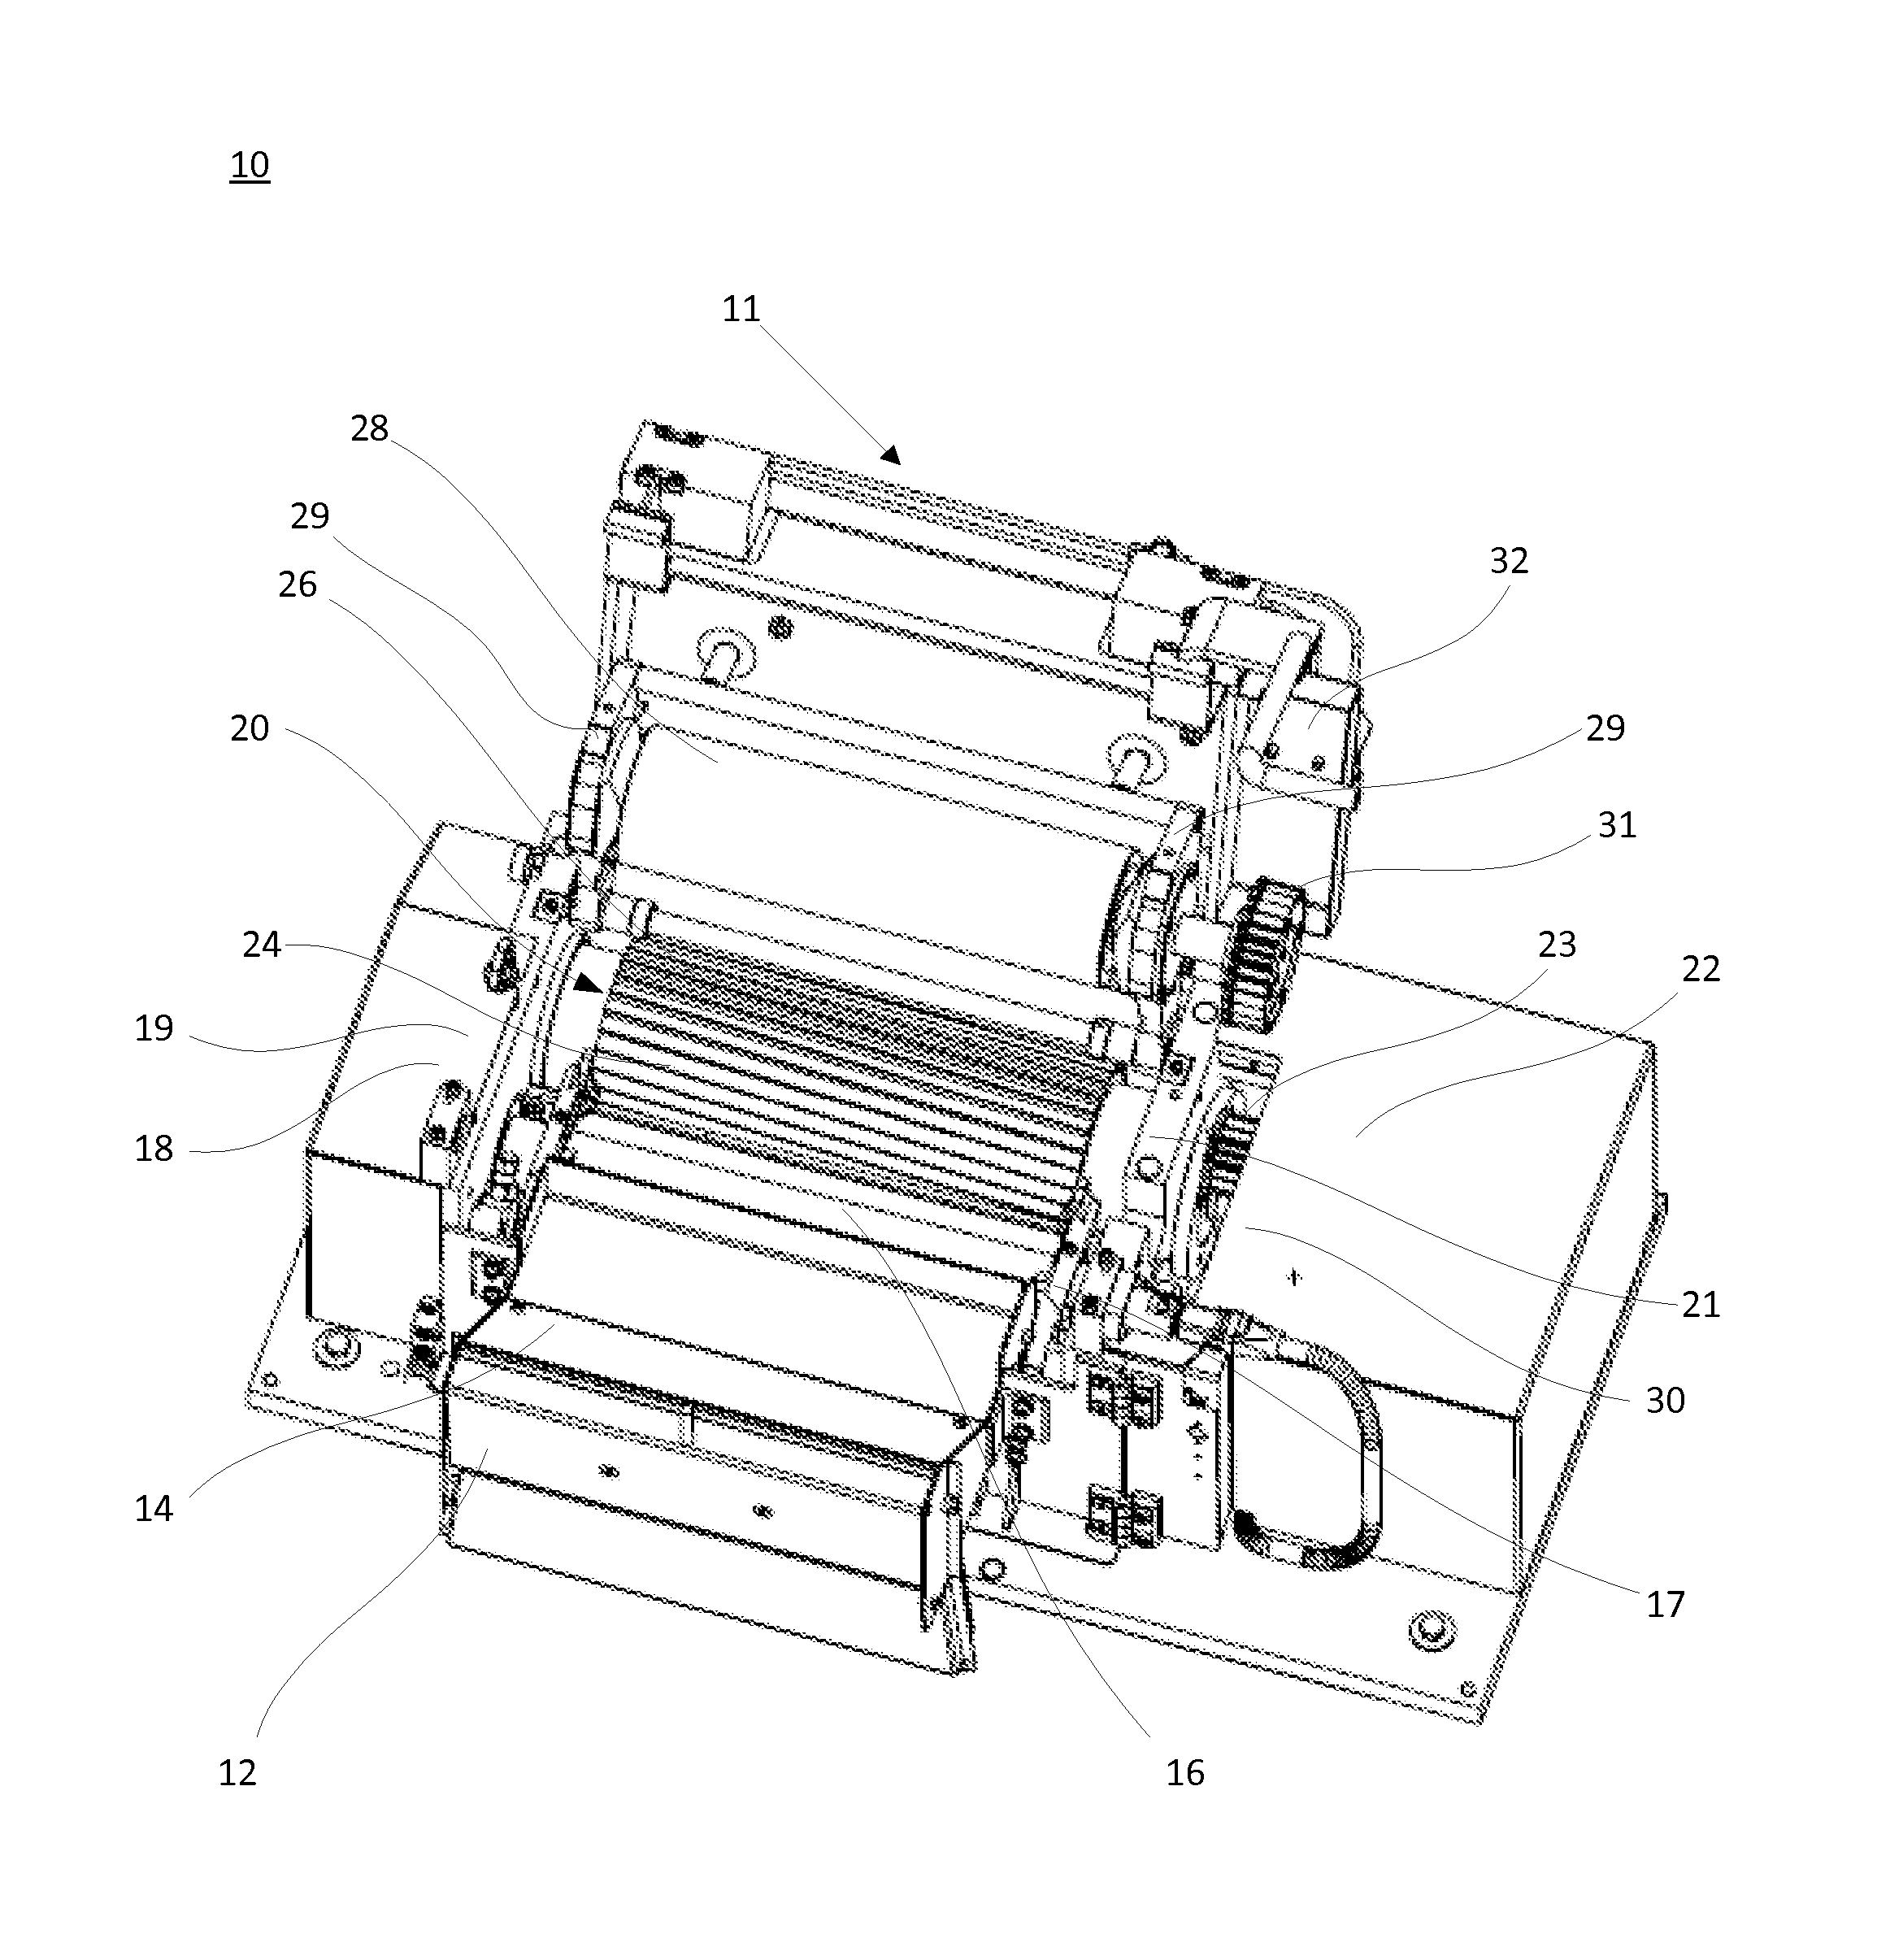 Pelletizing device with a cutting rotor